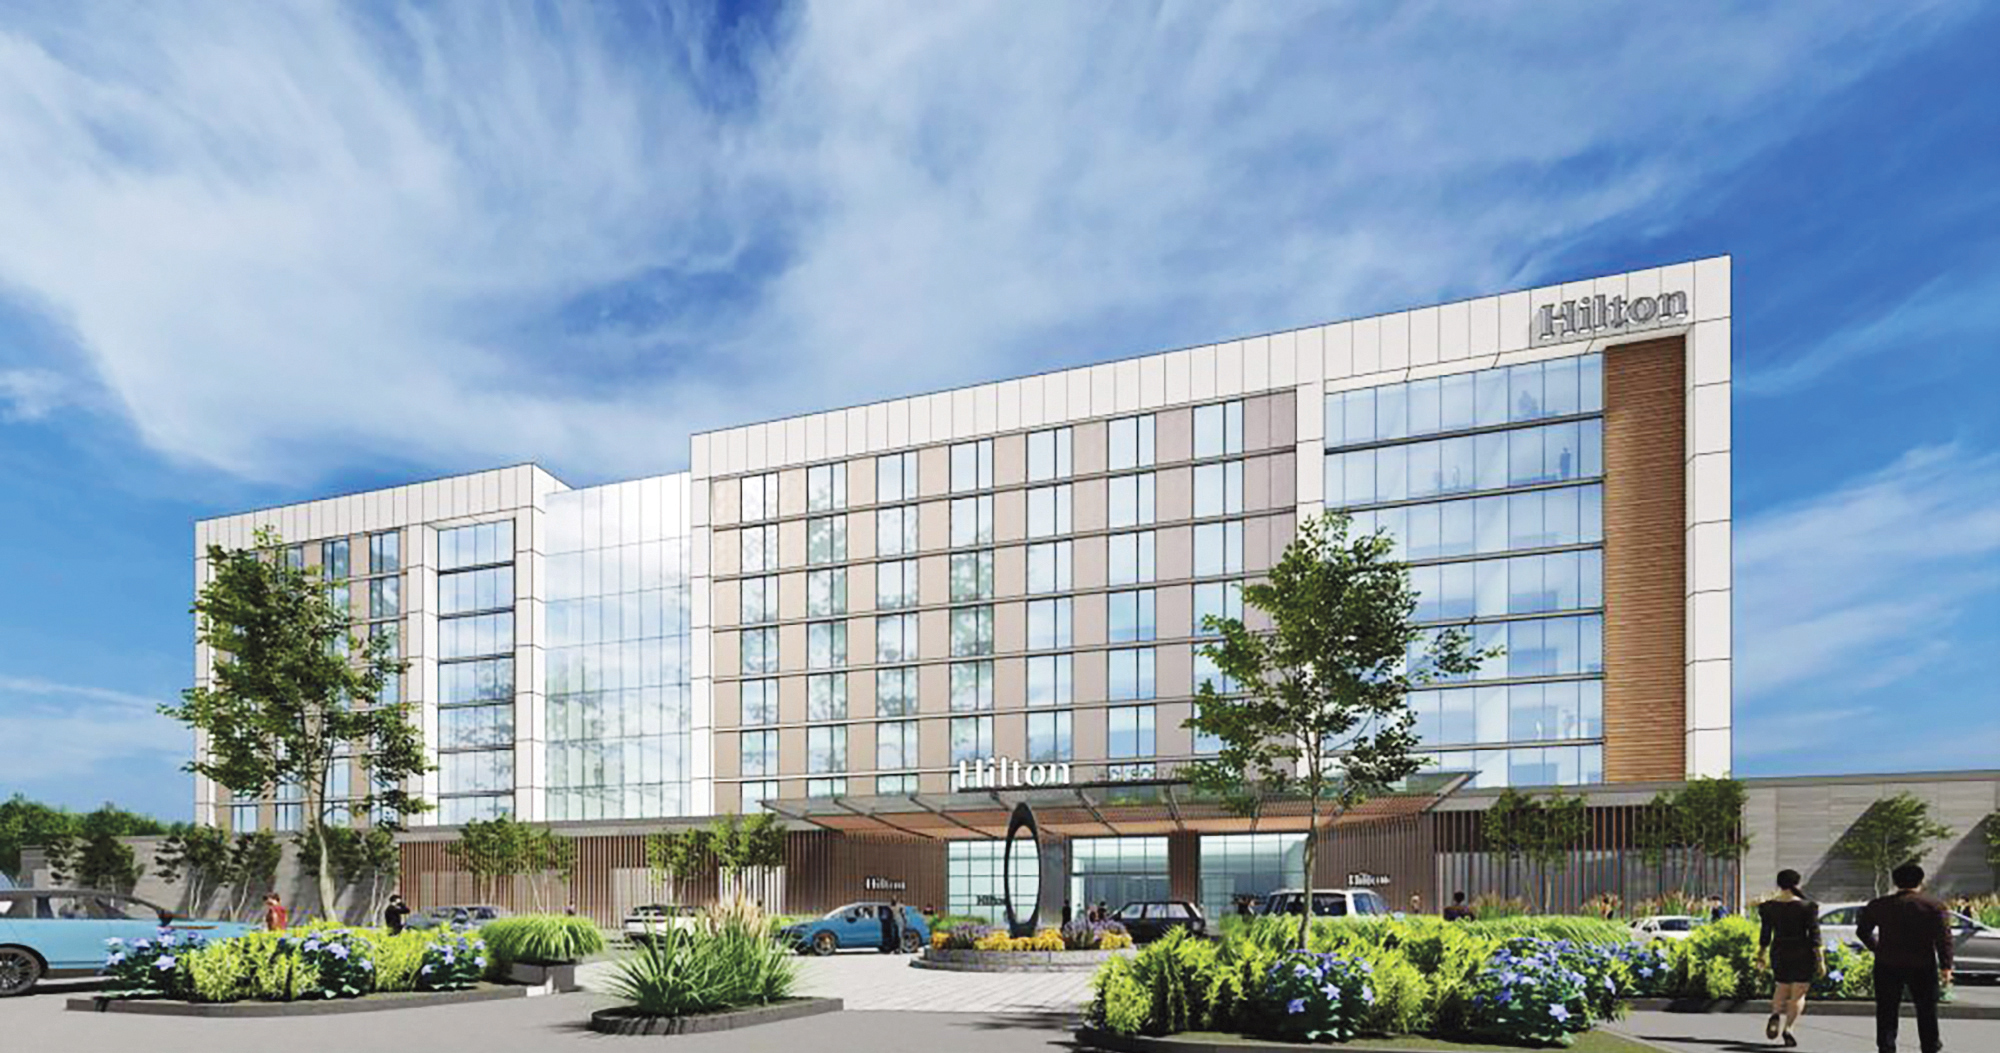 An eight-story, 179,000-square-foot Hilton hotel is planned for the Mayo Campus.